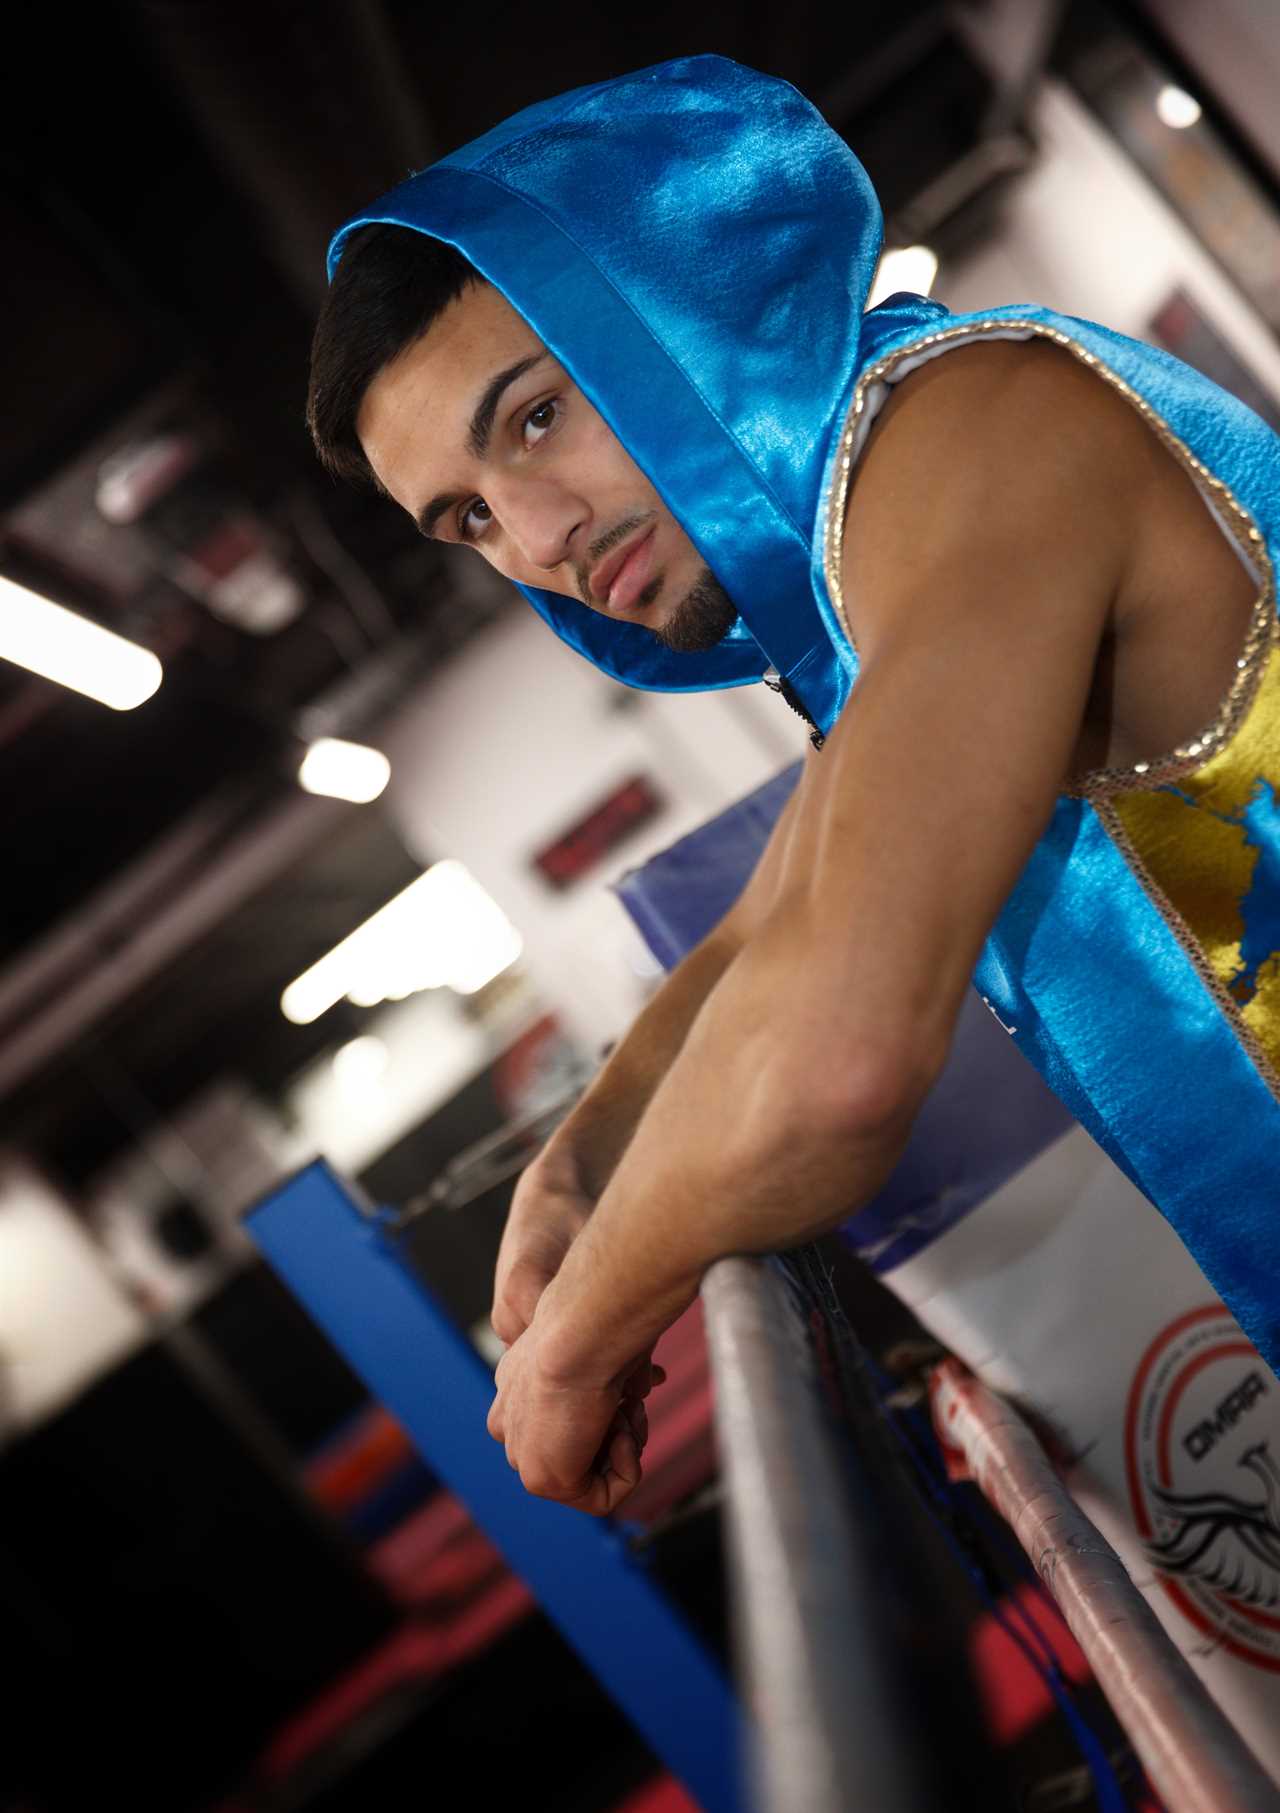 Jordan Flynn is a British Sikh boxer who has never lost to Anthony Joshua's agency. He is determined to rise up the ranks.